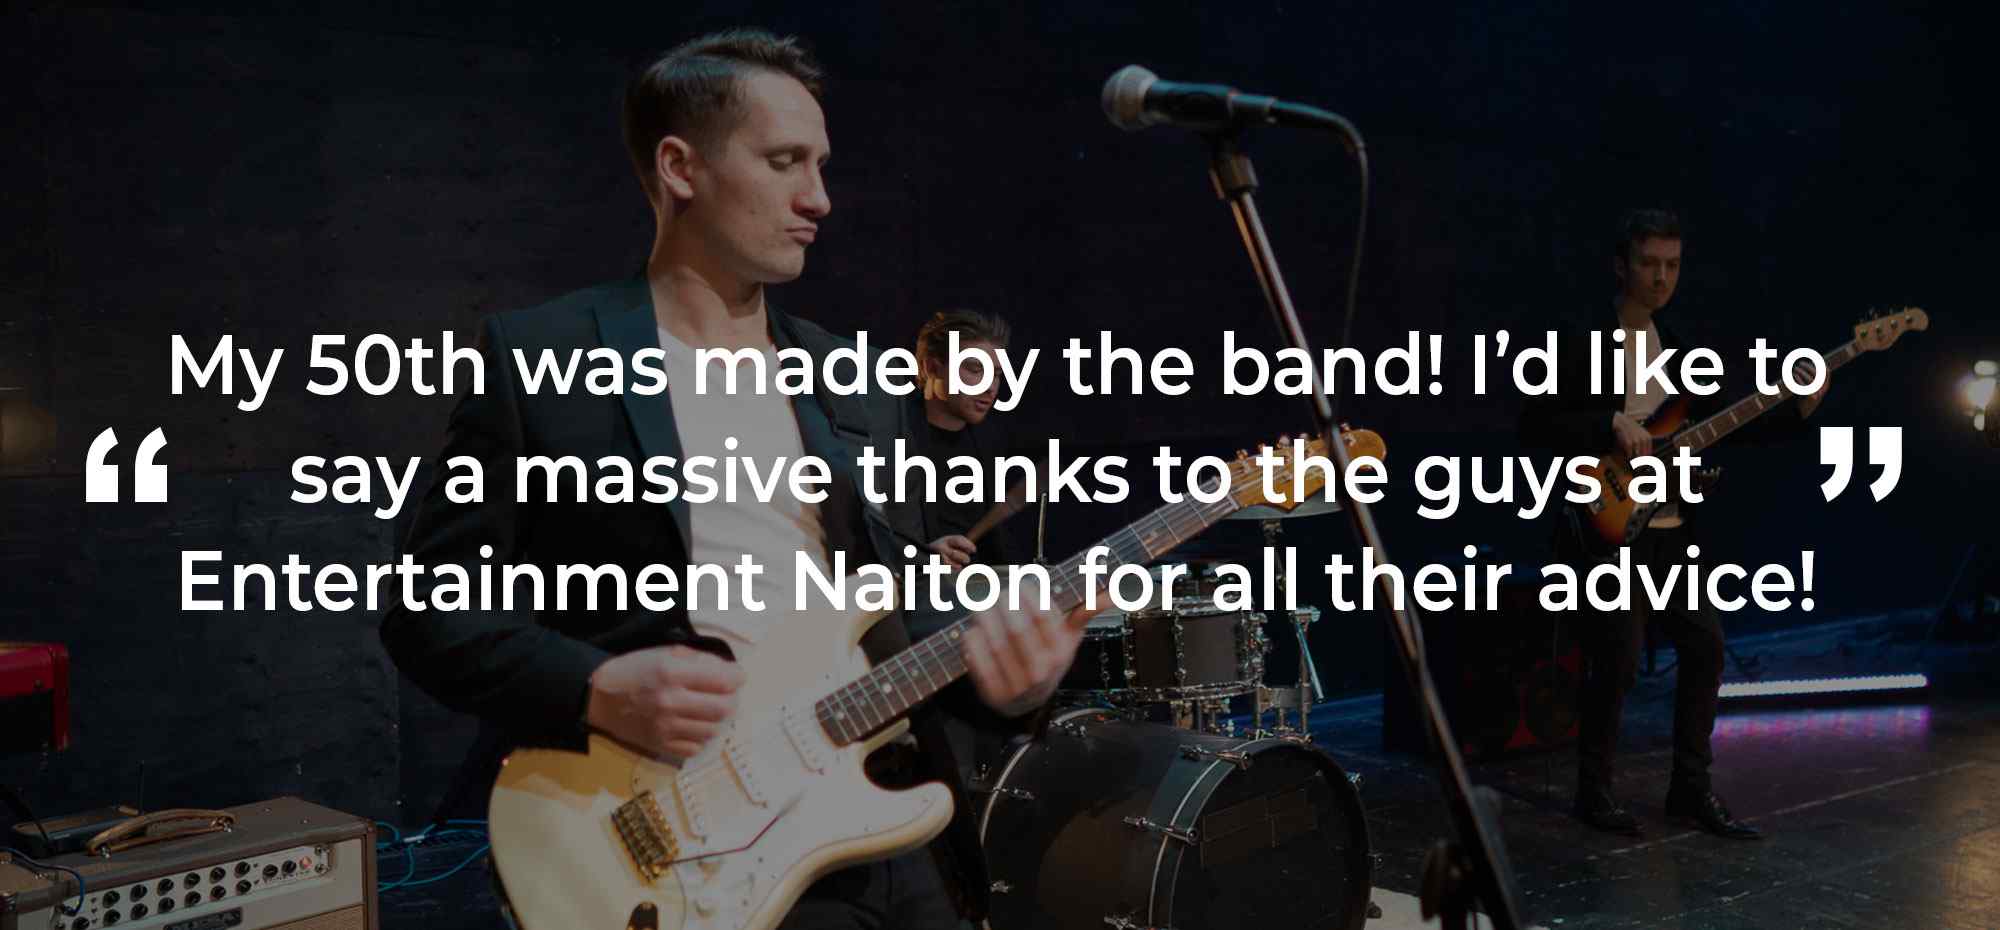 Client Review of a Party Band Northamptonshire